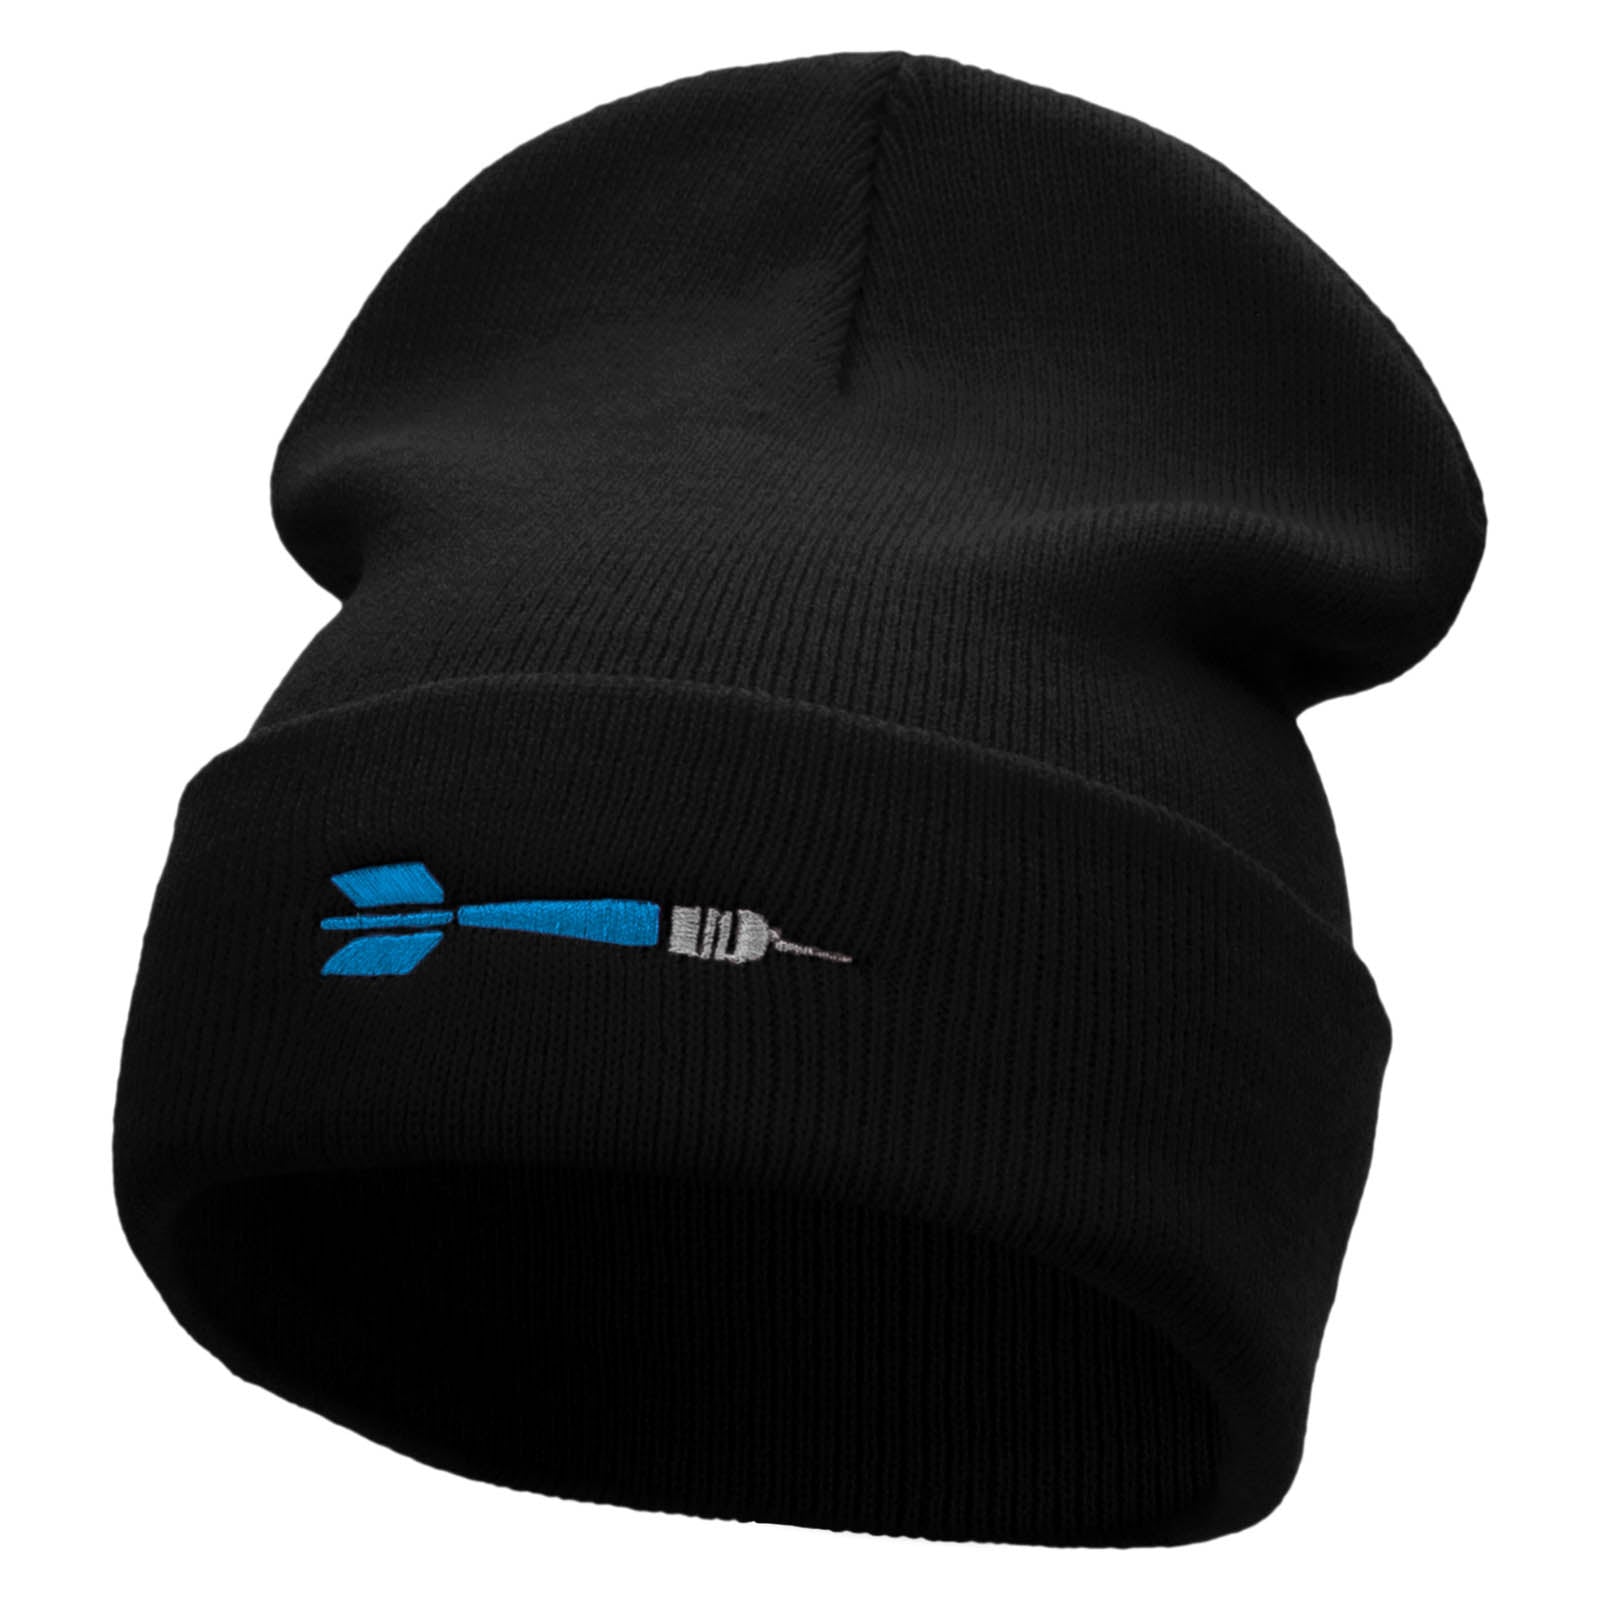 The Throwing Dart Embroidered 12 Inch Long Knitted Beanie - Black OSFM